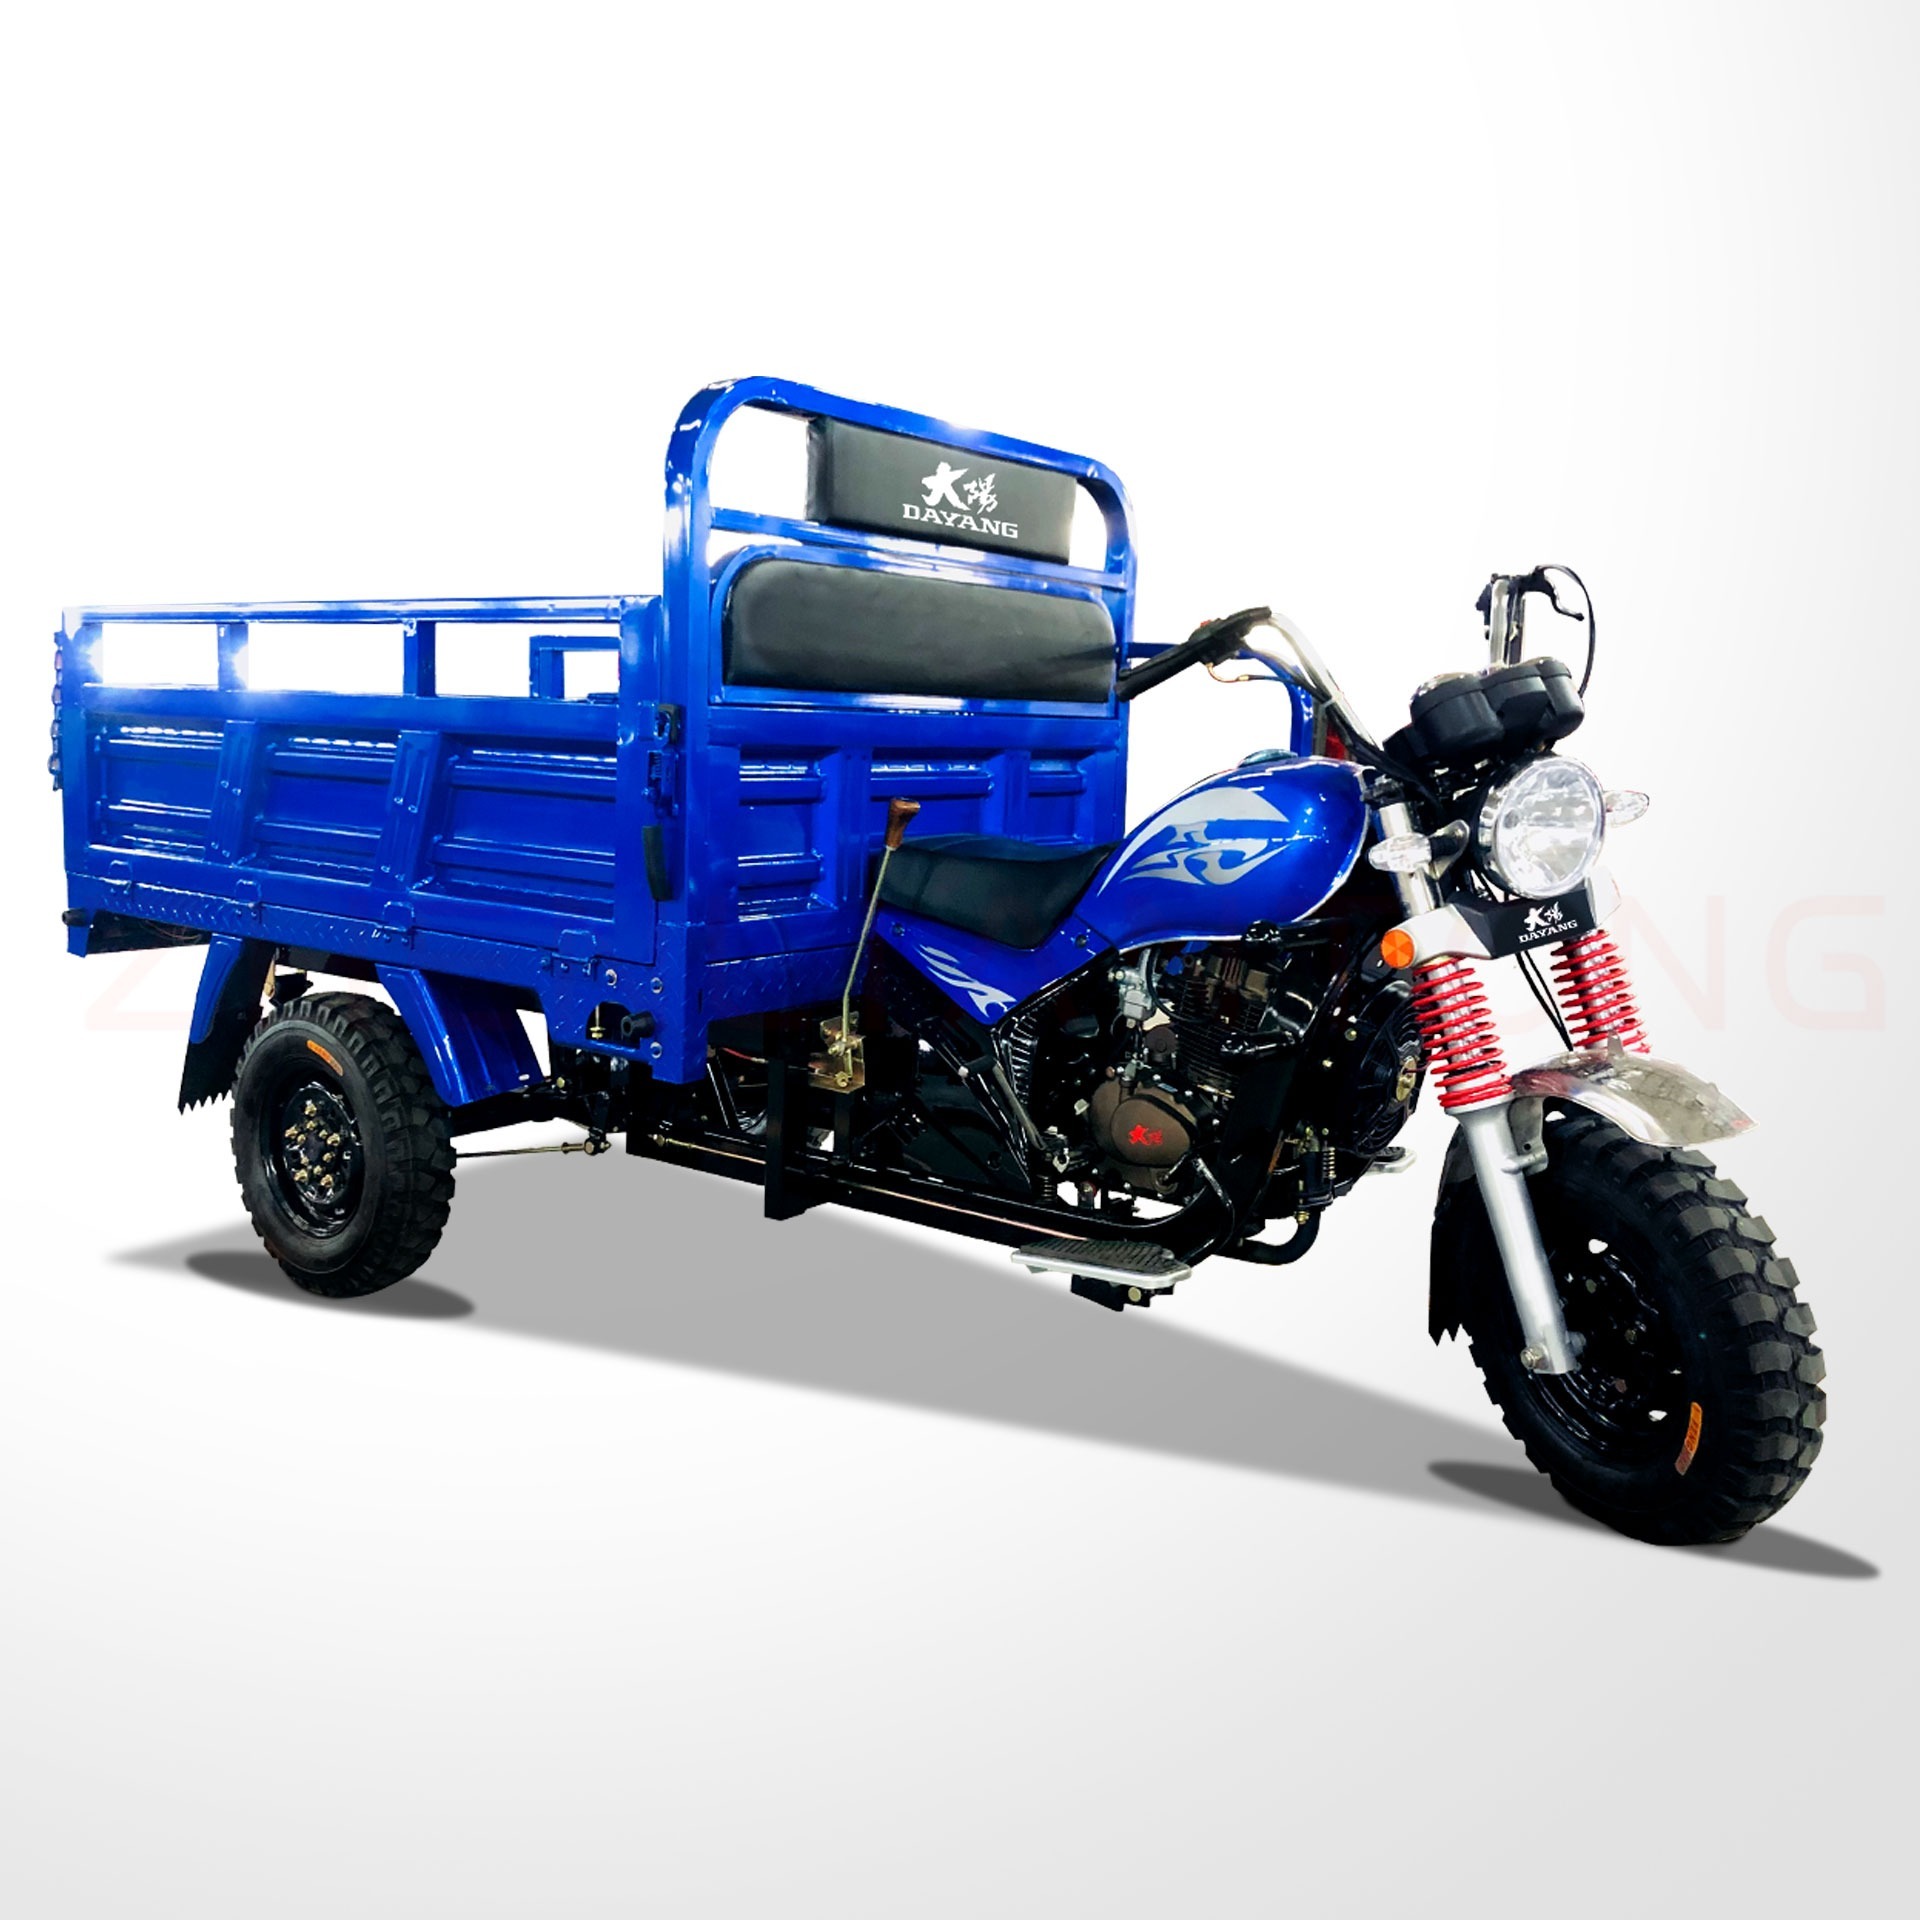 150cc/200cc/250cc Auto 3 Three Wheel/Wheeler Gasoline/Gas Bajaj Cabin Tricycles Taxi Passenger Disabled Moto/Motor Tricycle